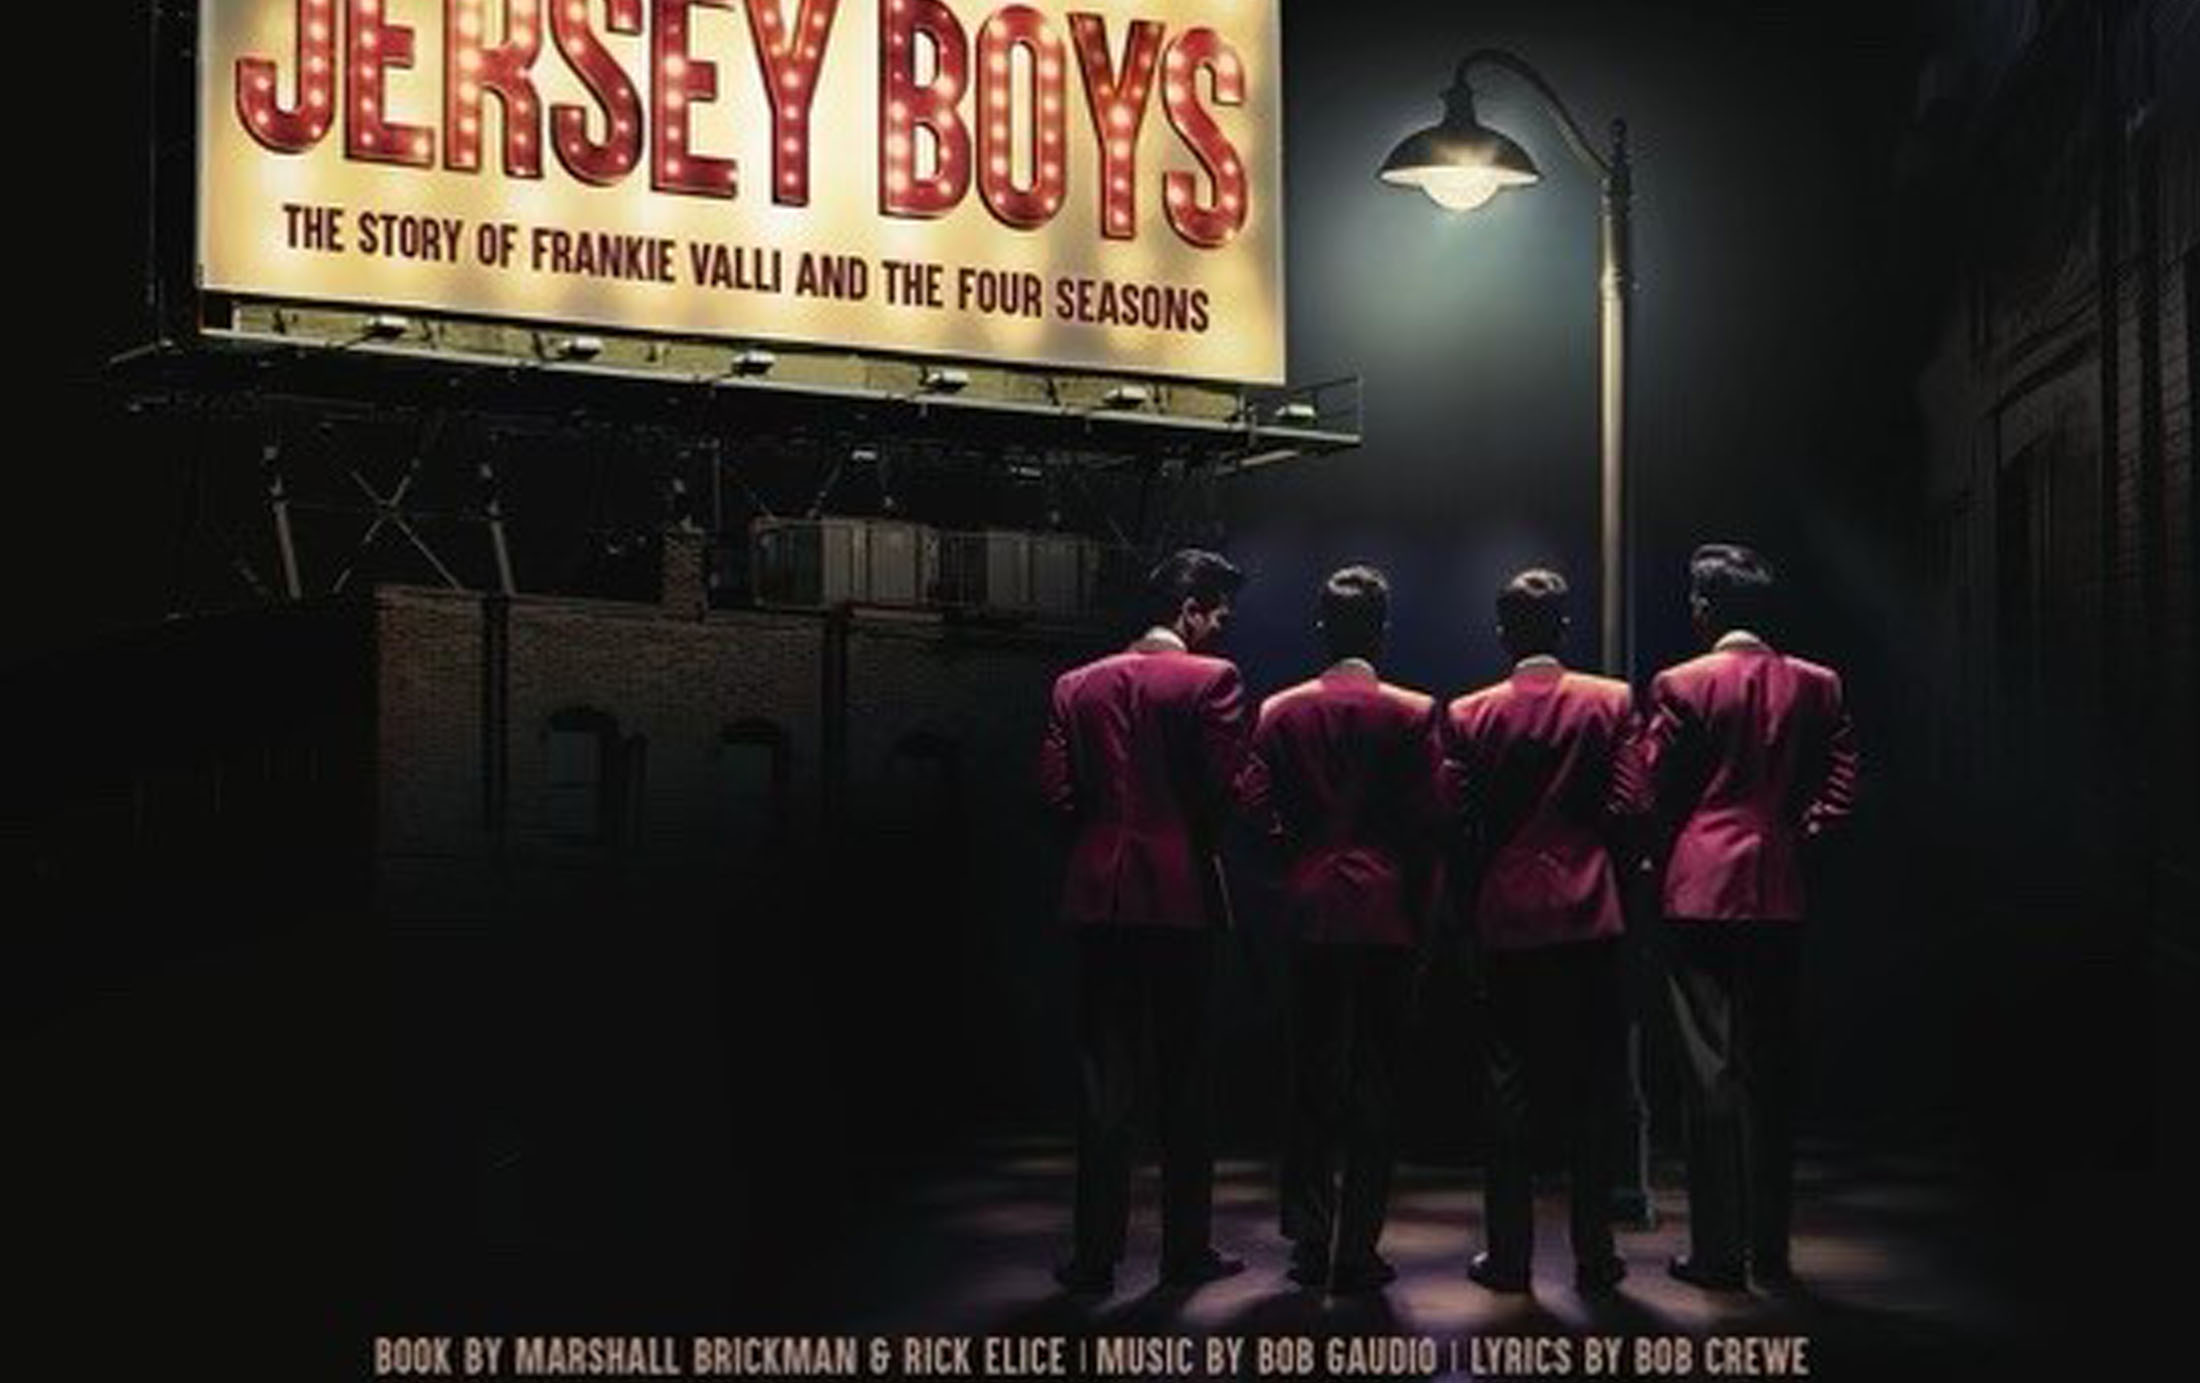 Image of theater marquee sign showing Jersey Boys show